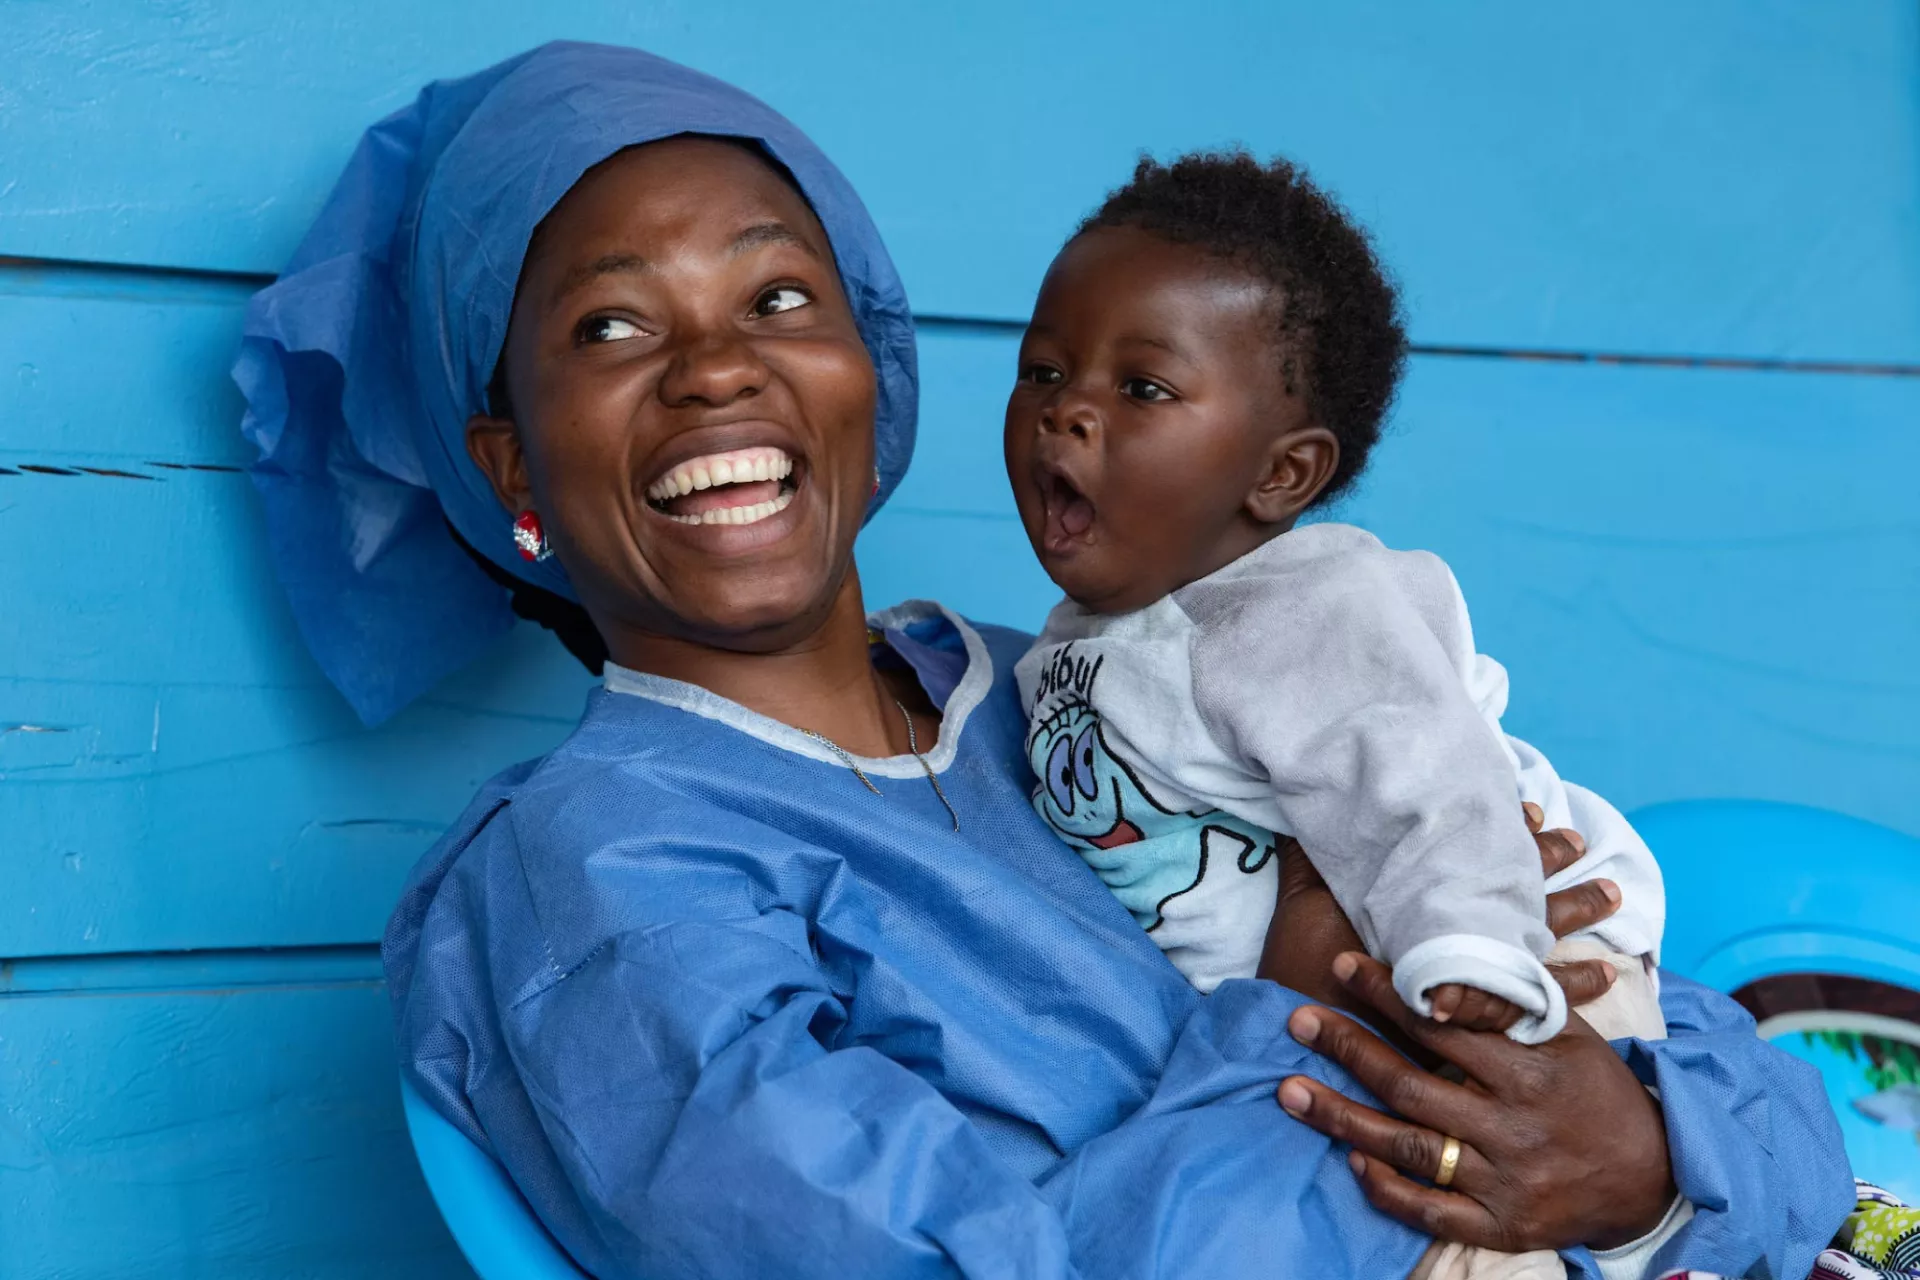 A woman dressed in blue smiles with a young baby sitting on her lap